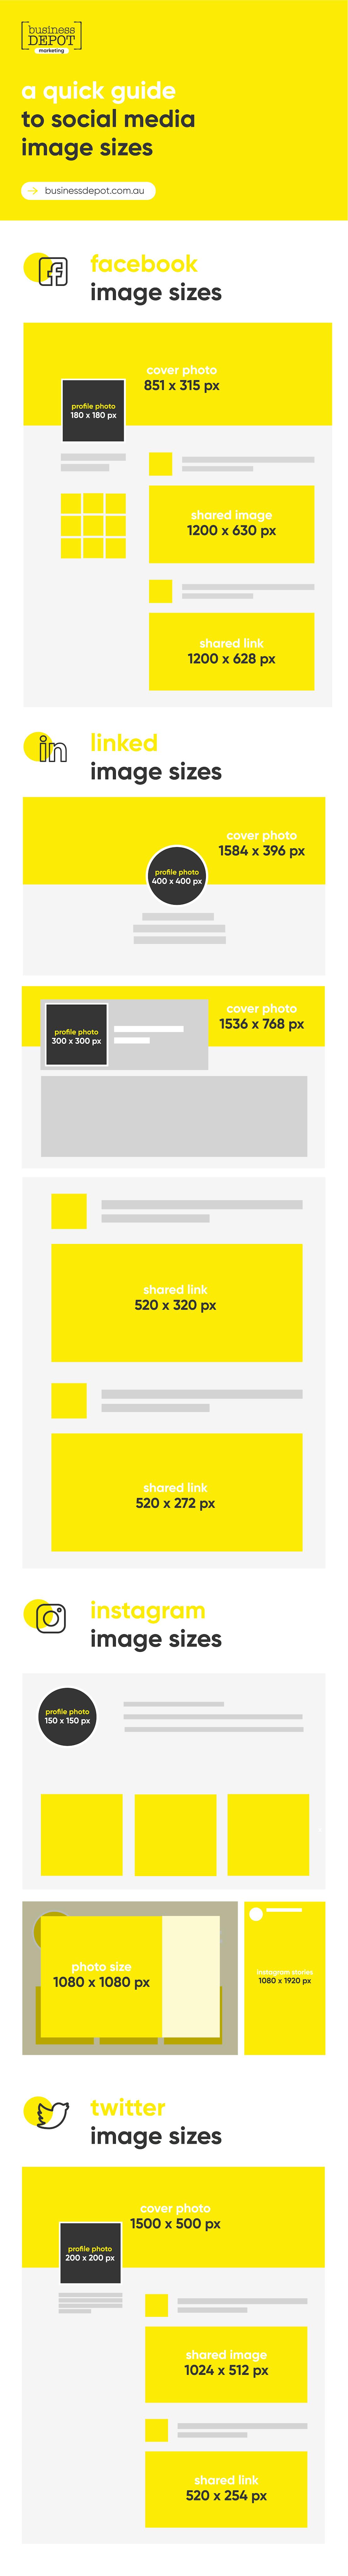 Guide To Social Media Image Sizes Infographic